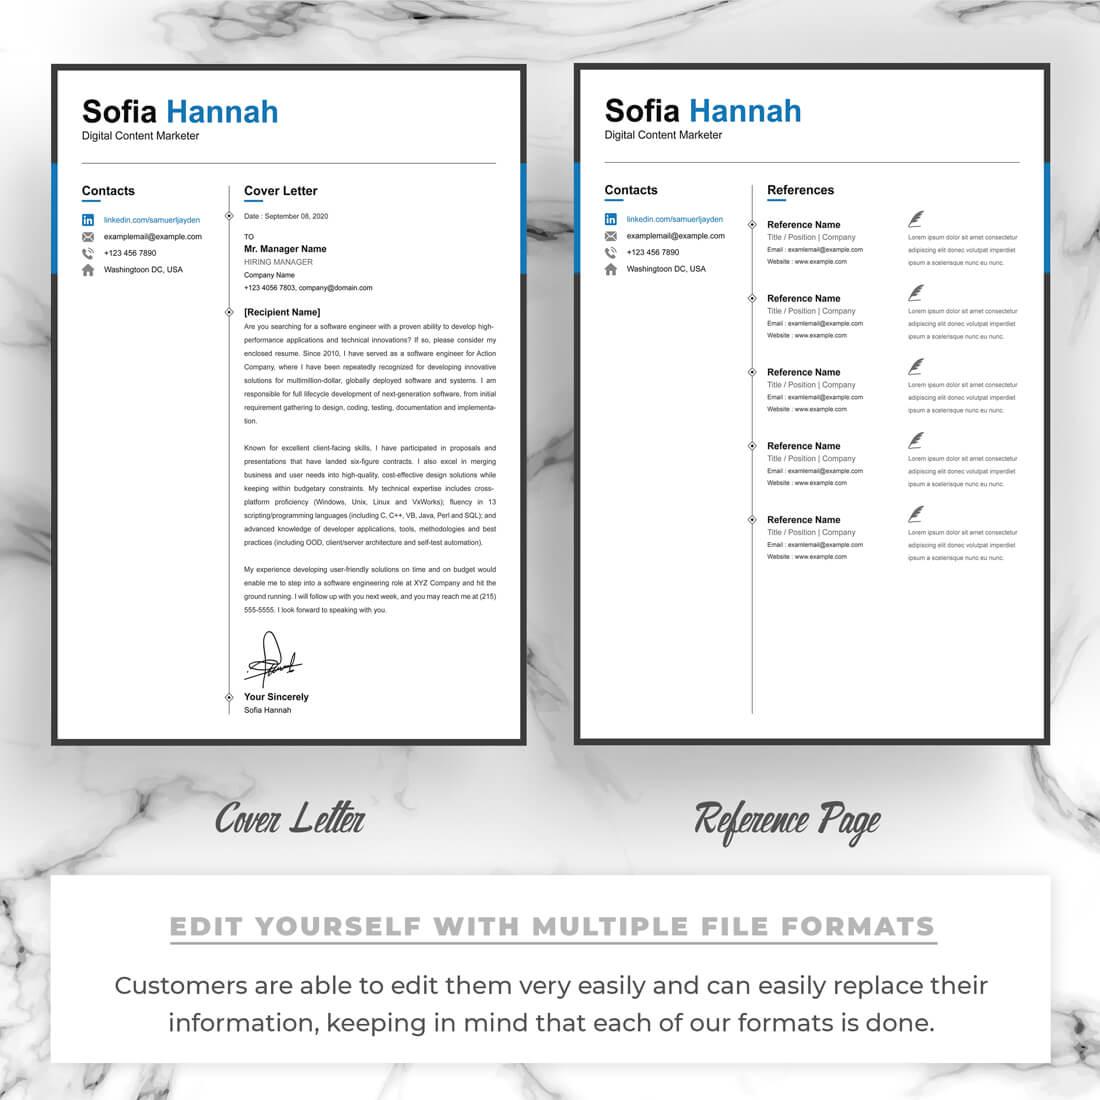 Two pages of the Digital Content Marketer | Creative Resume Design.